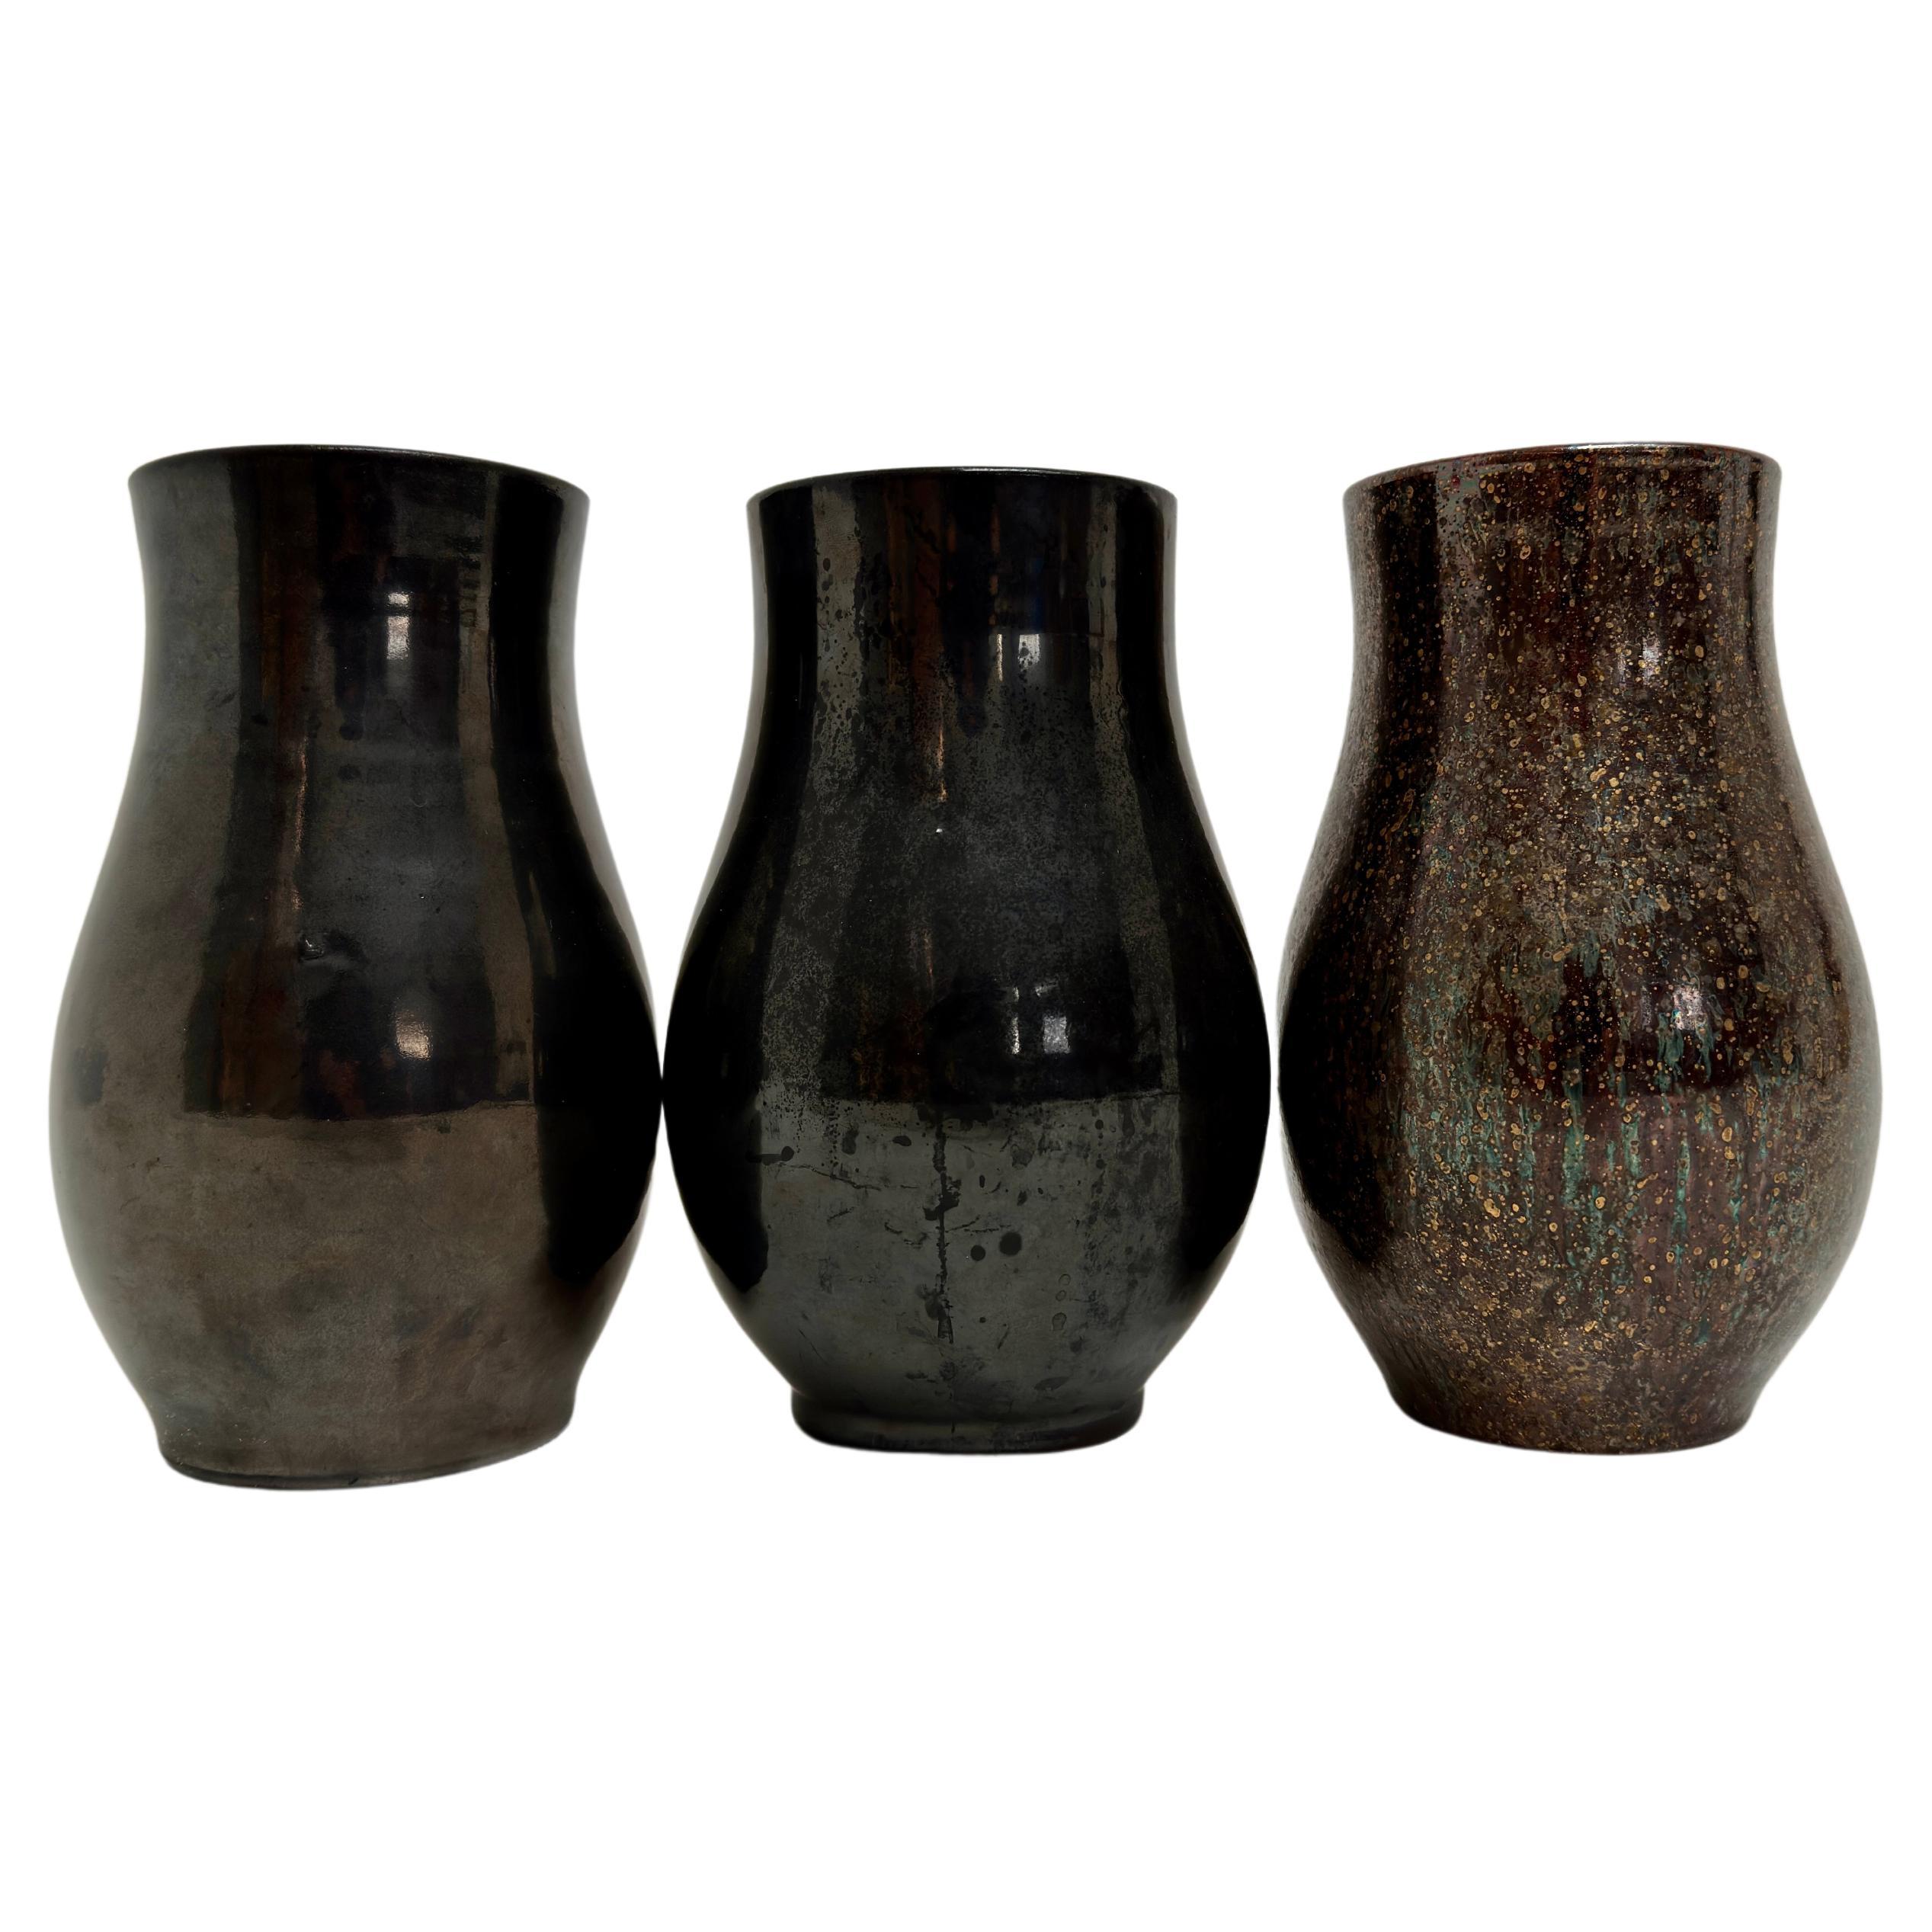 A Set of 3 Vases, Accolay, France c. 1960